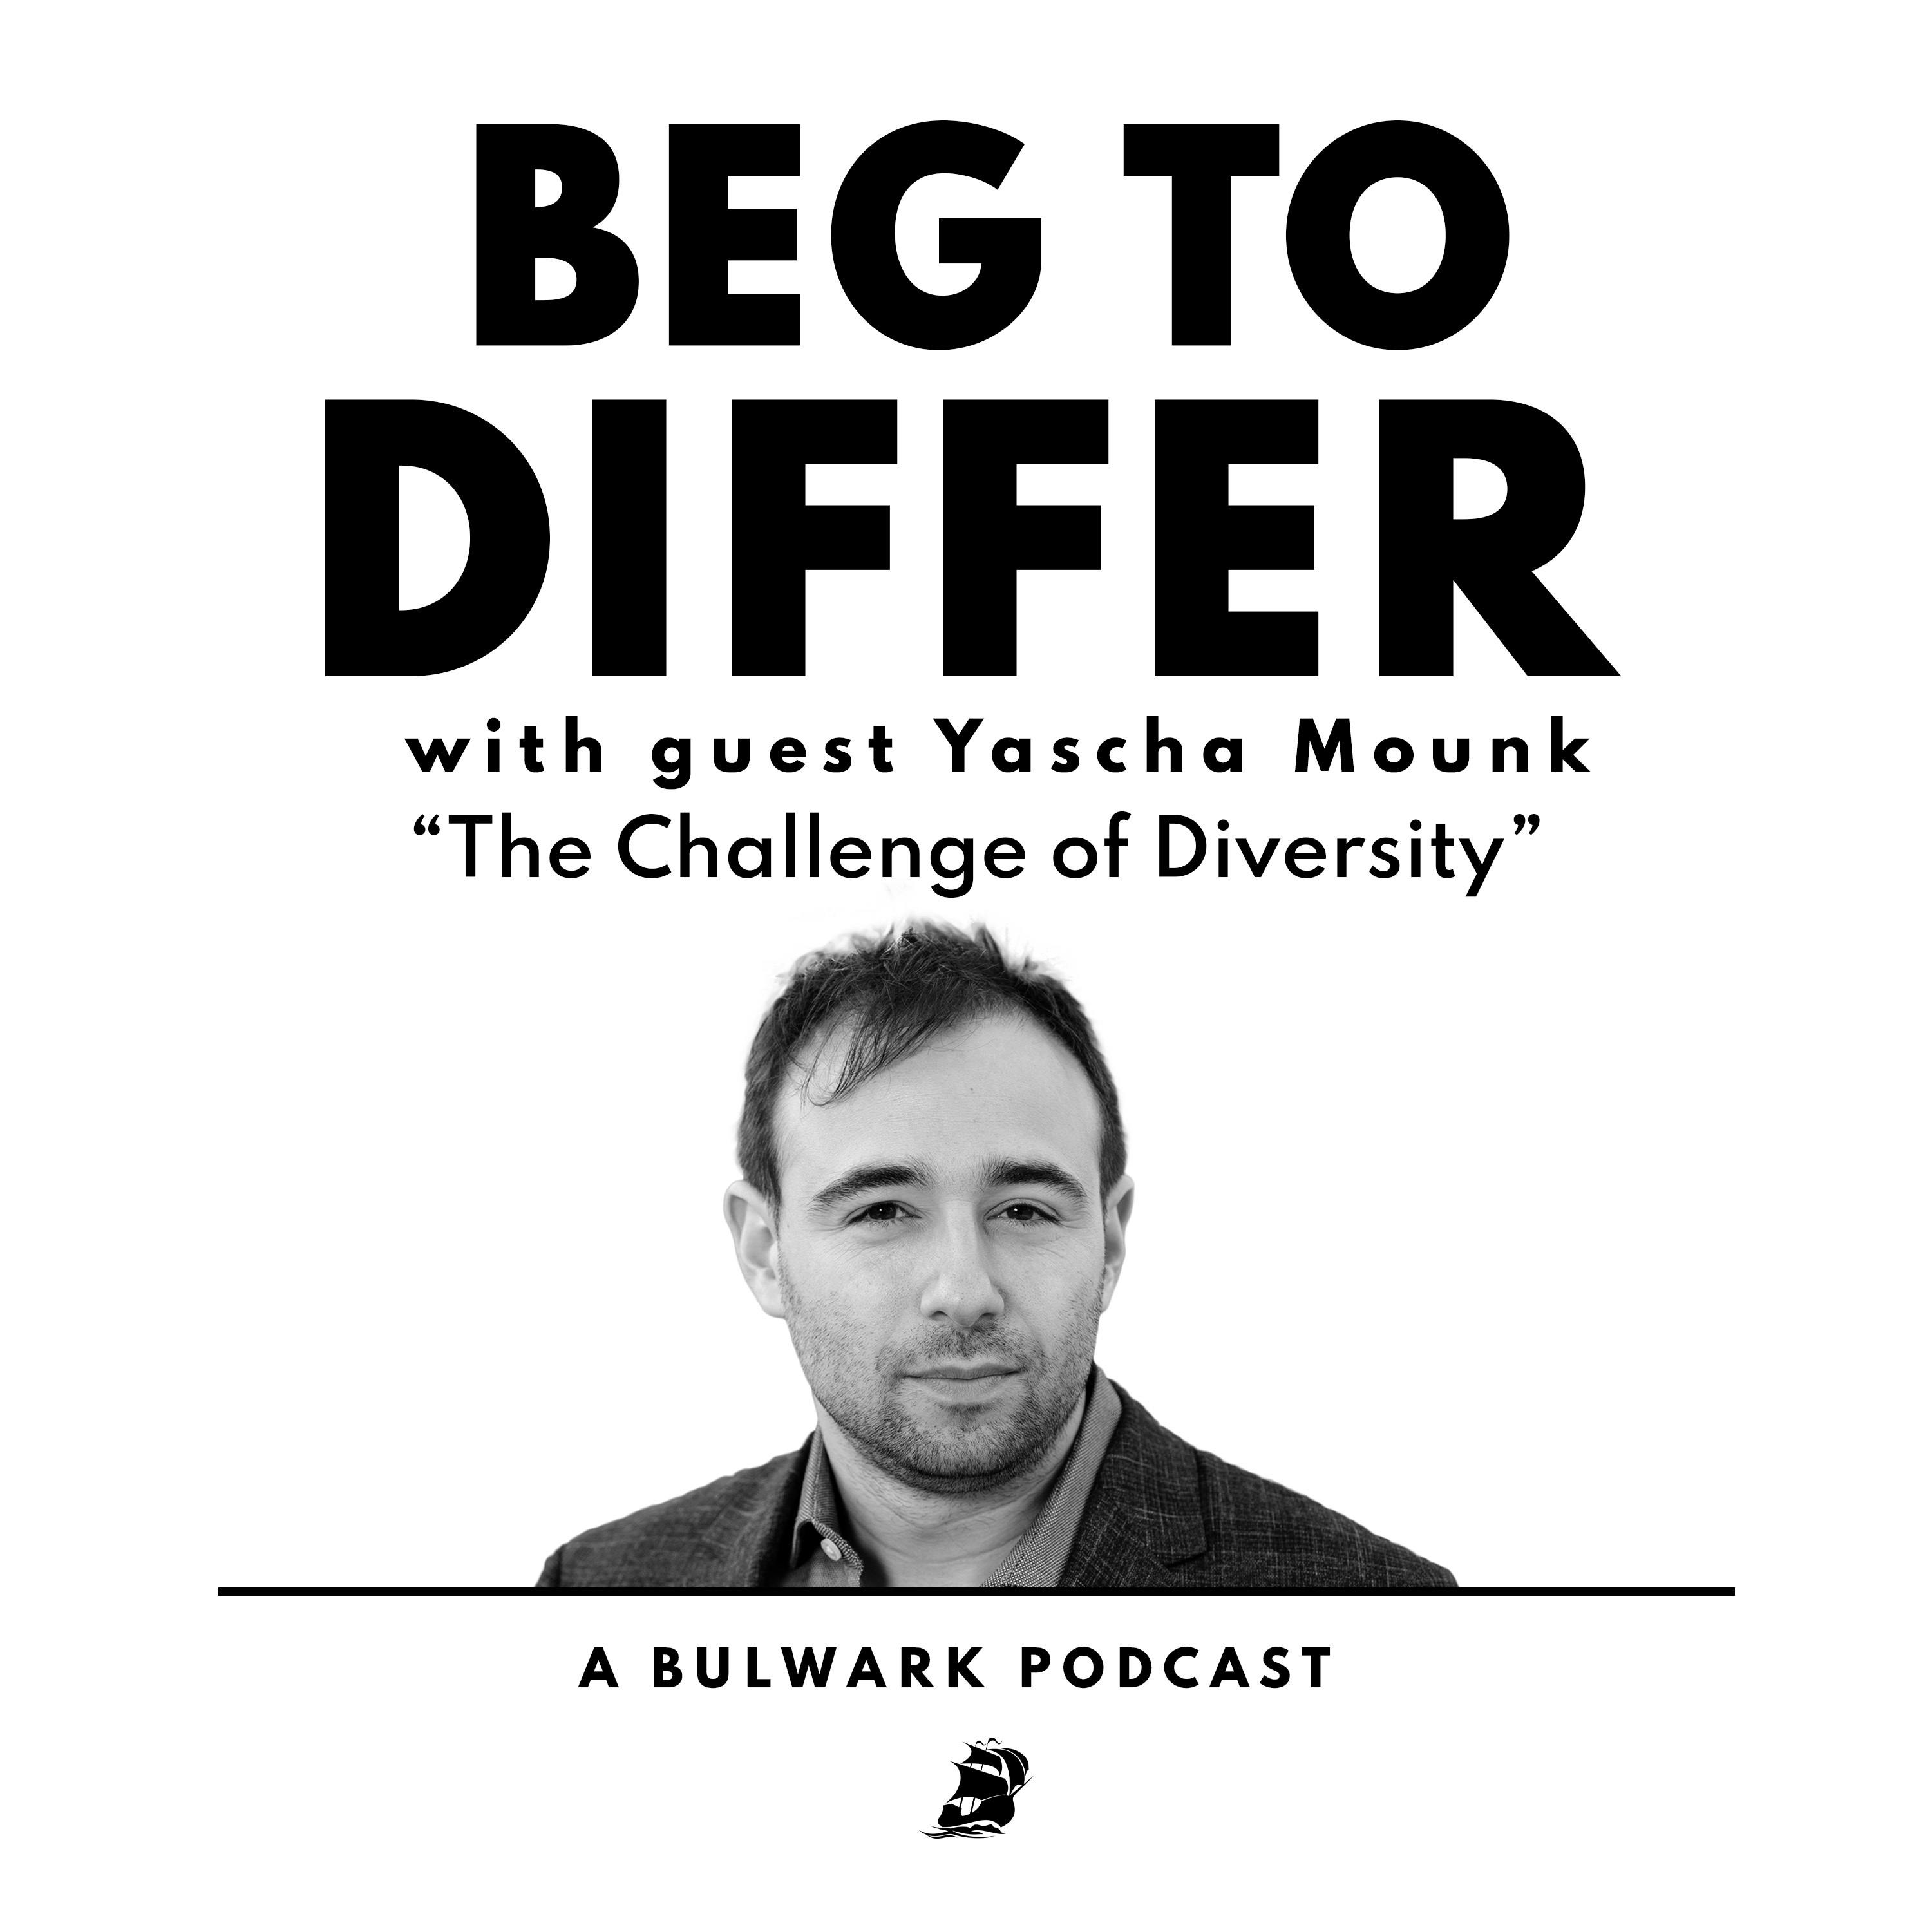 The Challenge of Diversity (with Yascha Mounk)